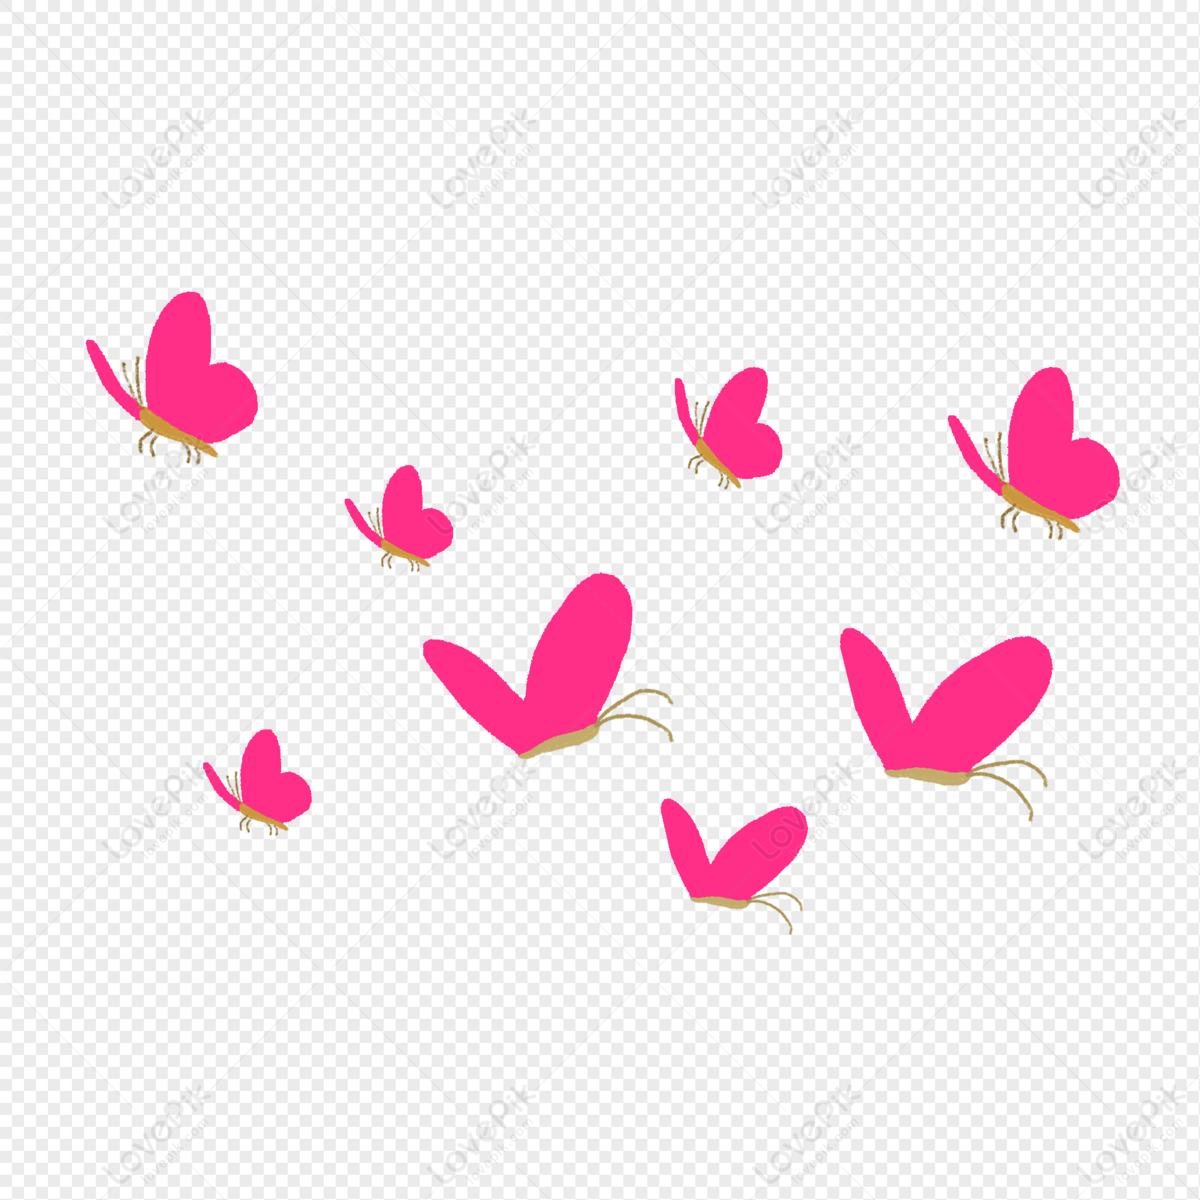 Pink Flying Butterfly Decorative Pattern PNG Transparent Background And  Clipart Image For Free Download - Lovepik | 401207090